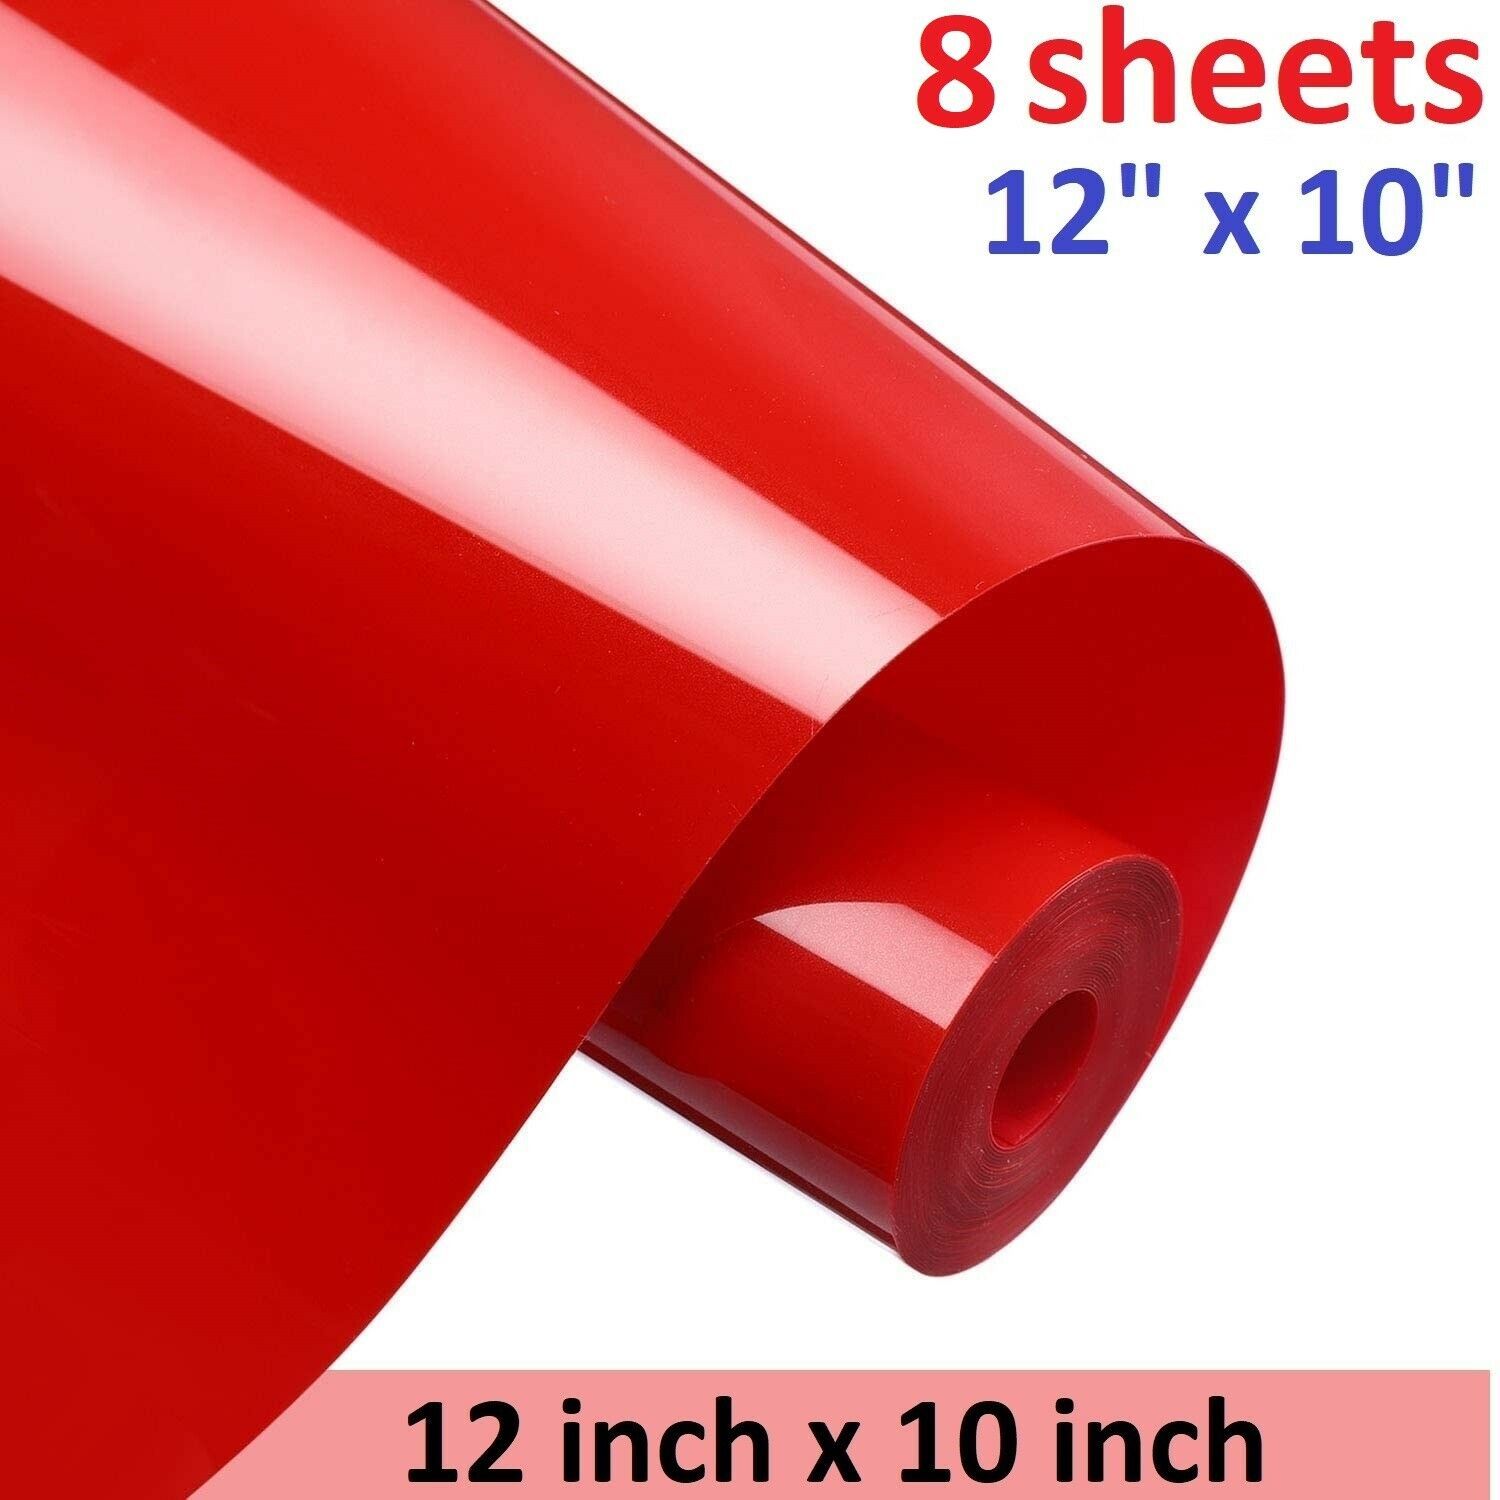 Rose Red HTV Heat Transfer Vinyl Roll: 12 inch x 12ft Rose Red HTV Vinyl for Shirts - Easy to Cut & Weed Iron on Vinyl for Clothes(Rose Red), Size: 12